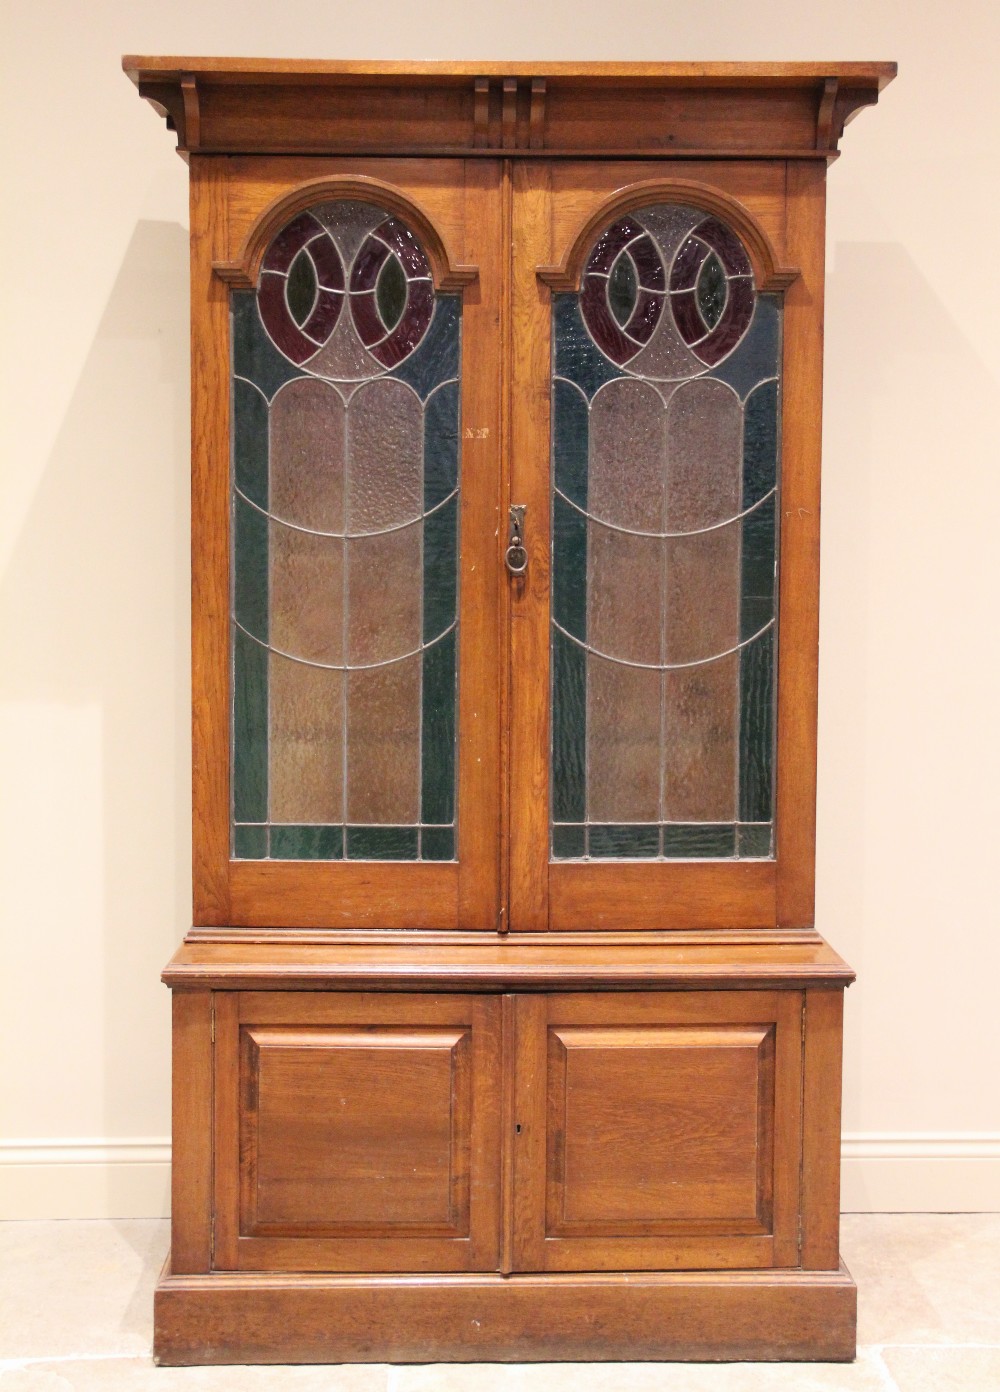 An early 20th century oak Arts and Crafts glazed bookcase, with an overhanging cornice above a